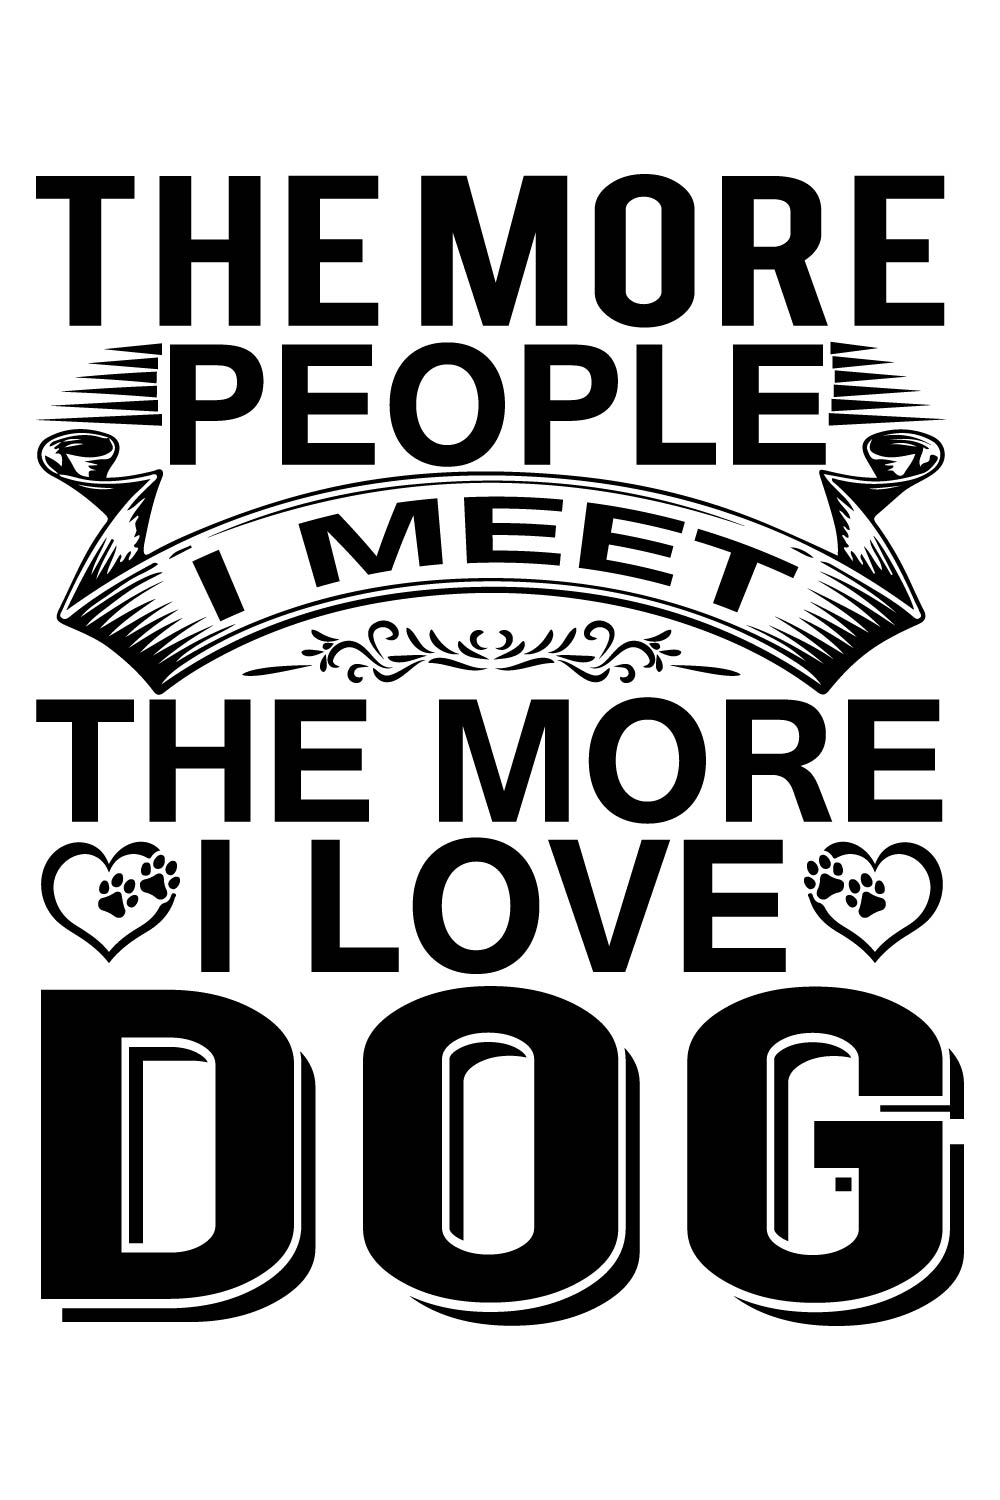 Image of a white T-shirt with a wonderful inscription The more people i meet the more i love dog.